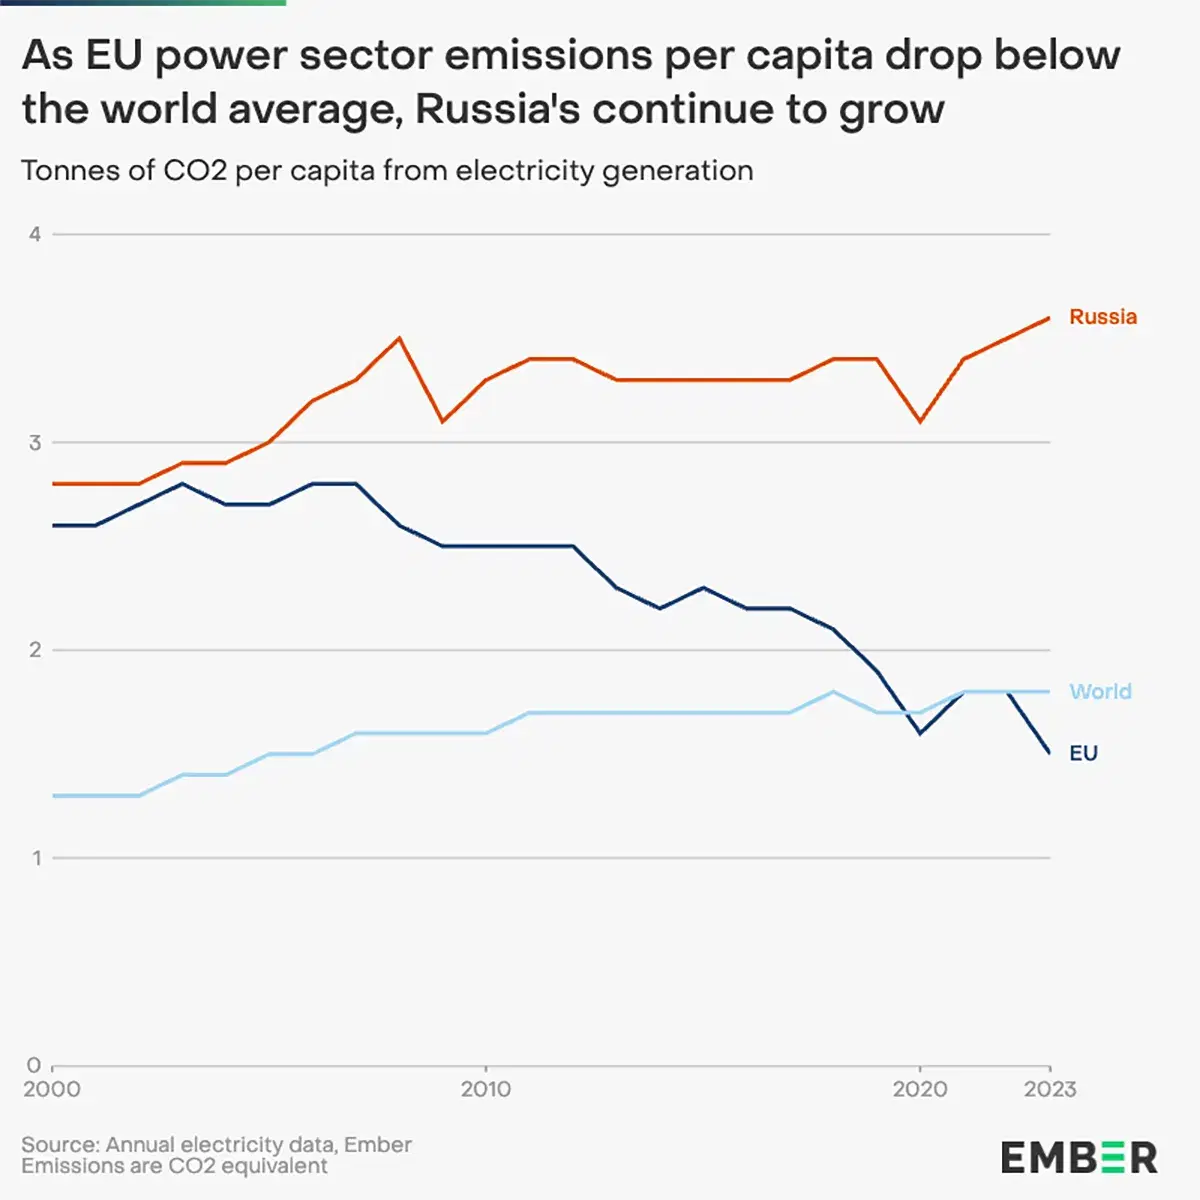 EU's Power Sector Emissions Drop Below World Average While Russia's Increases